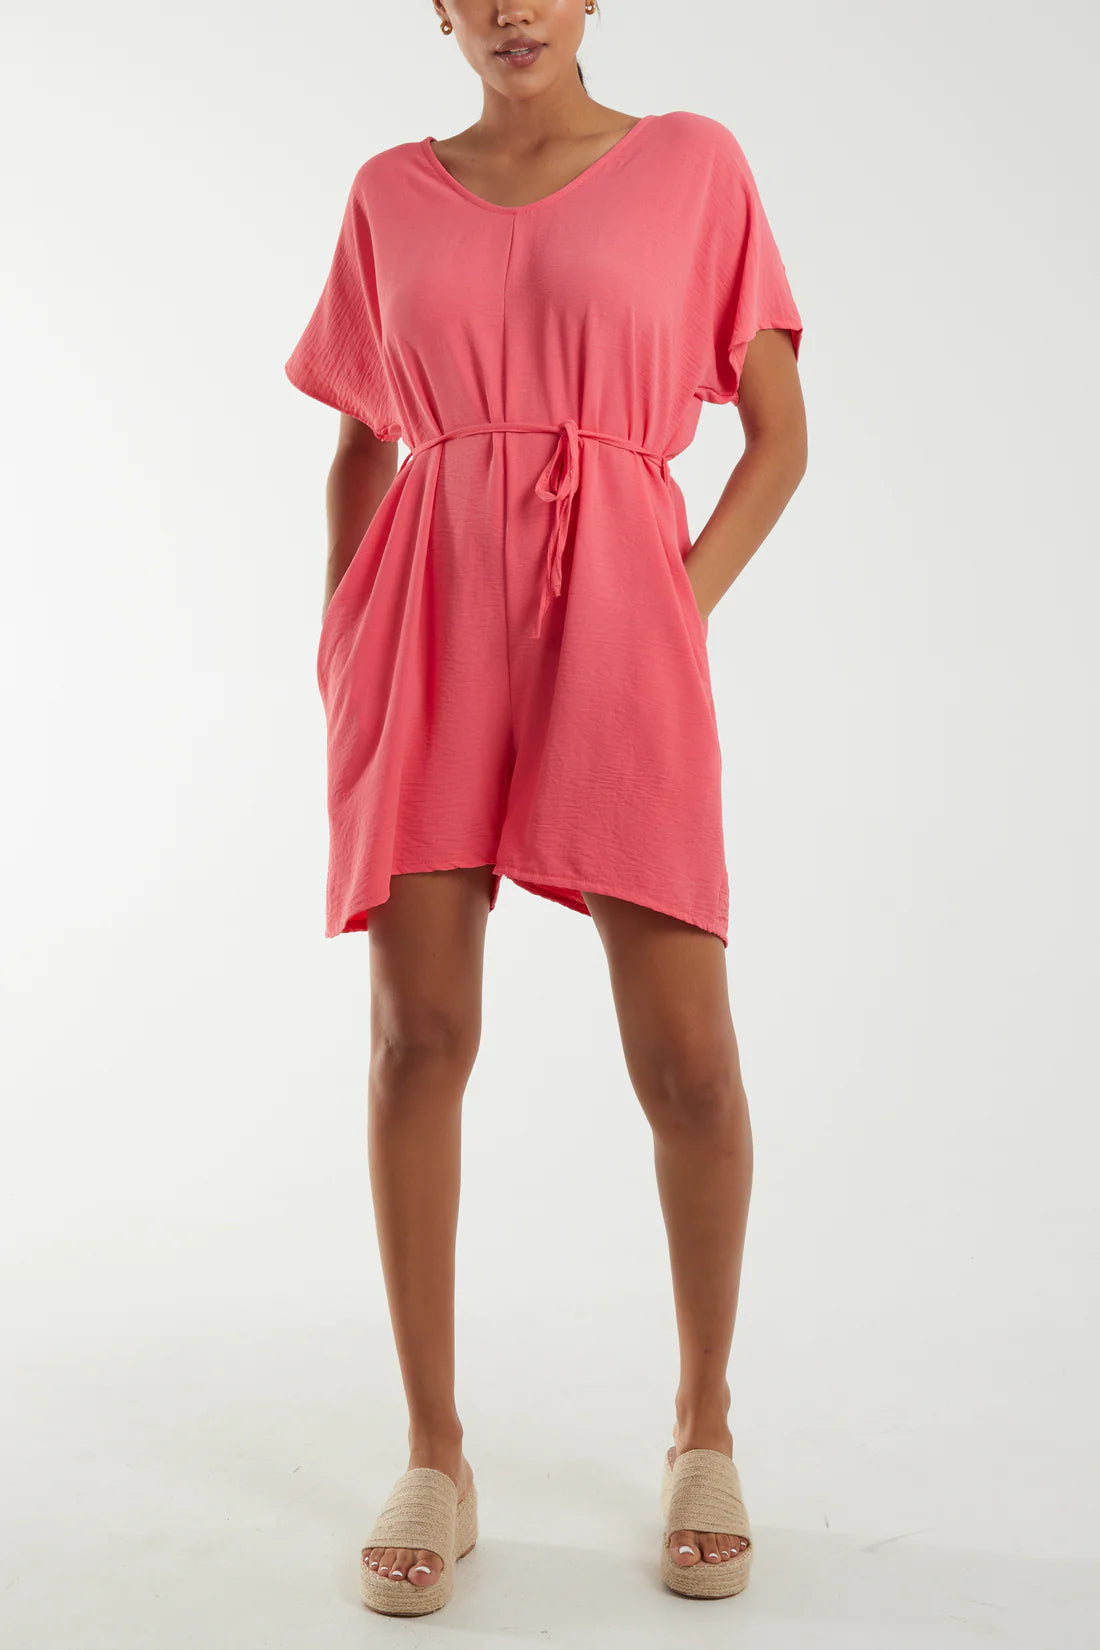 Oversized Casual Playsuit